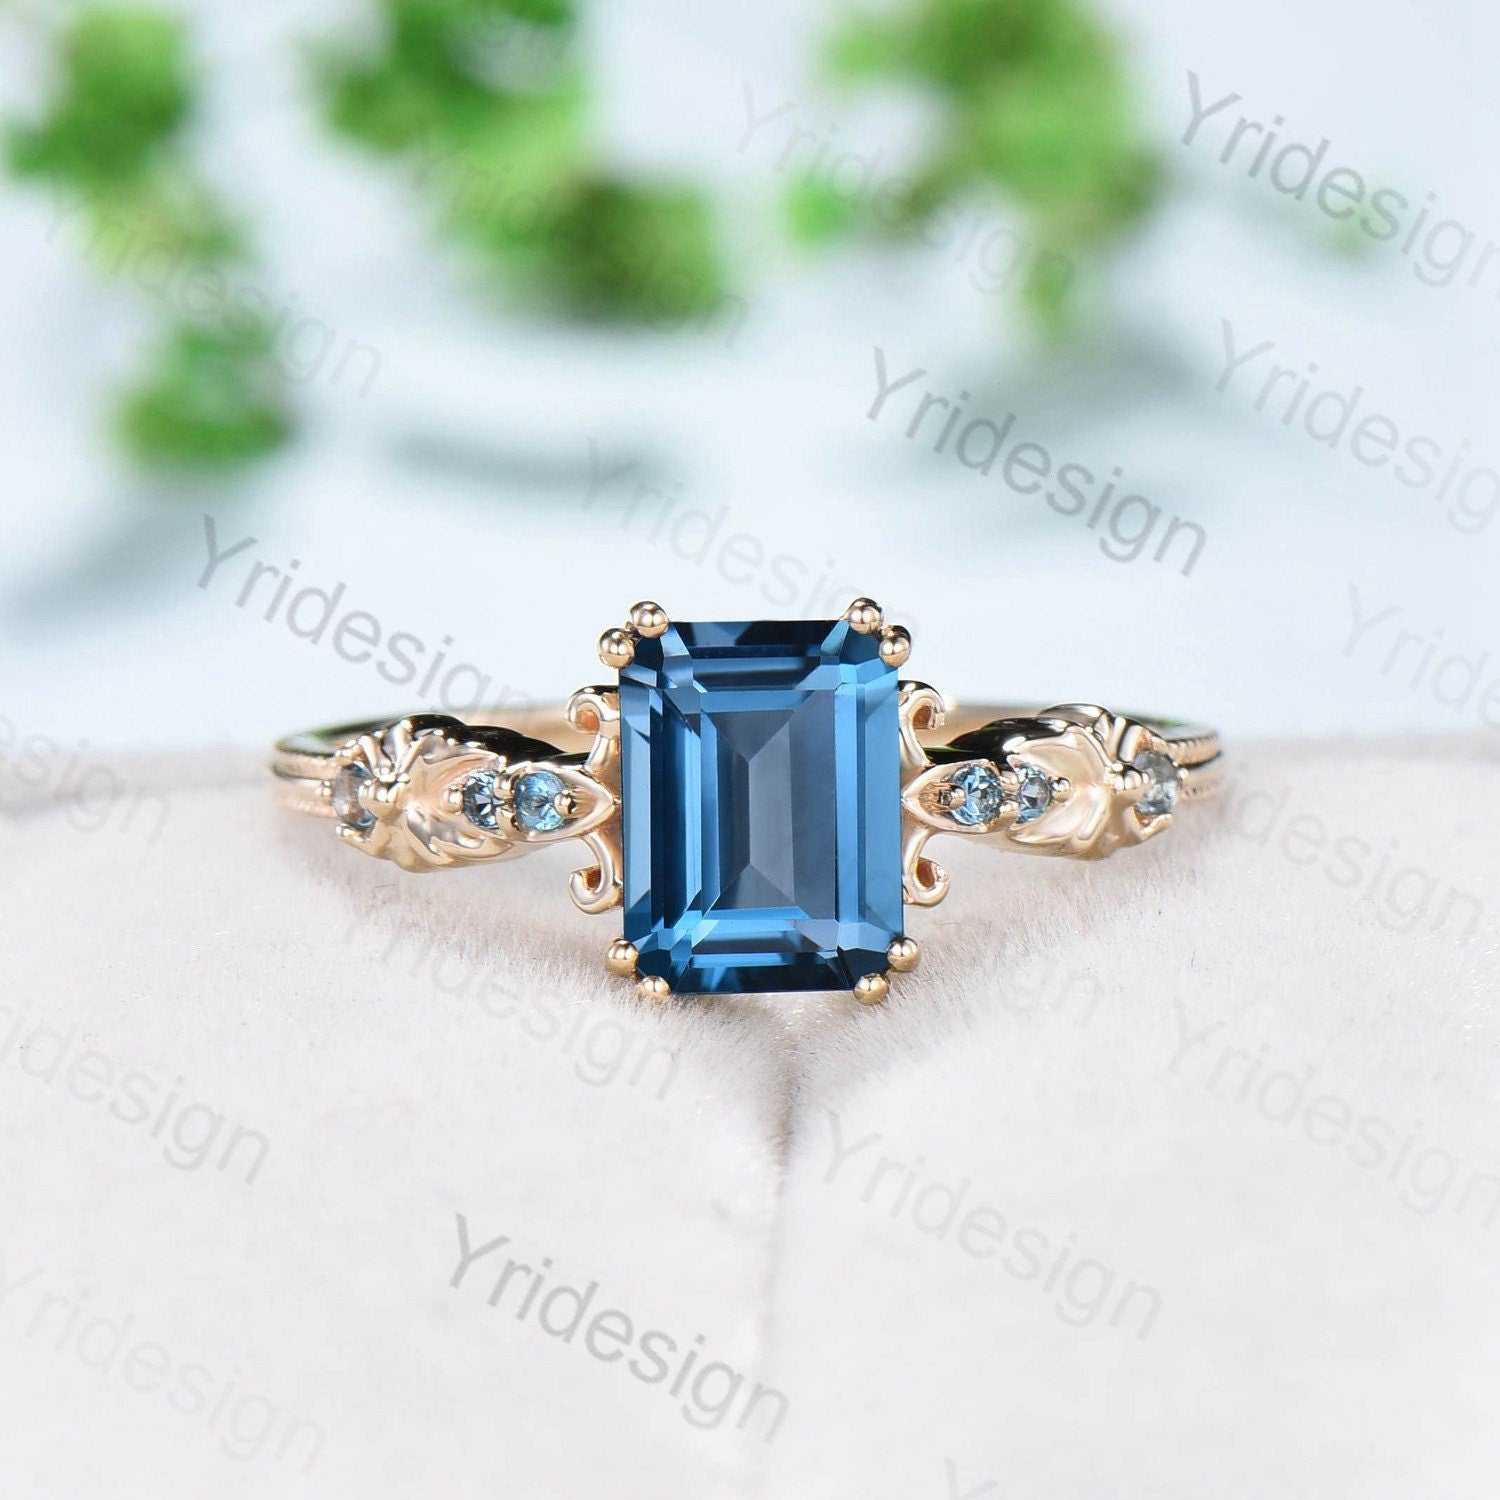 Retro Emerald Cut London Blue Topaz Ring Vintage Topaz Celtic Engagement Ring unique 8 prongs wedding Band Ring For Women Anniversary Gift - PENFINE